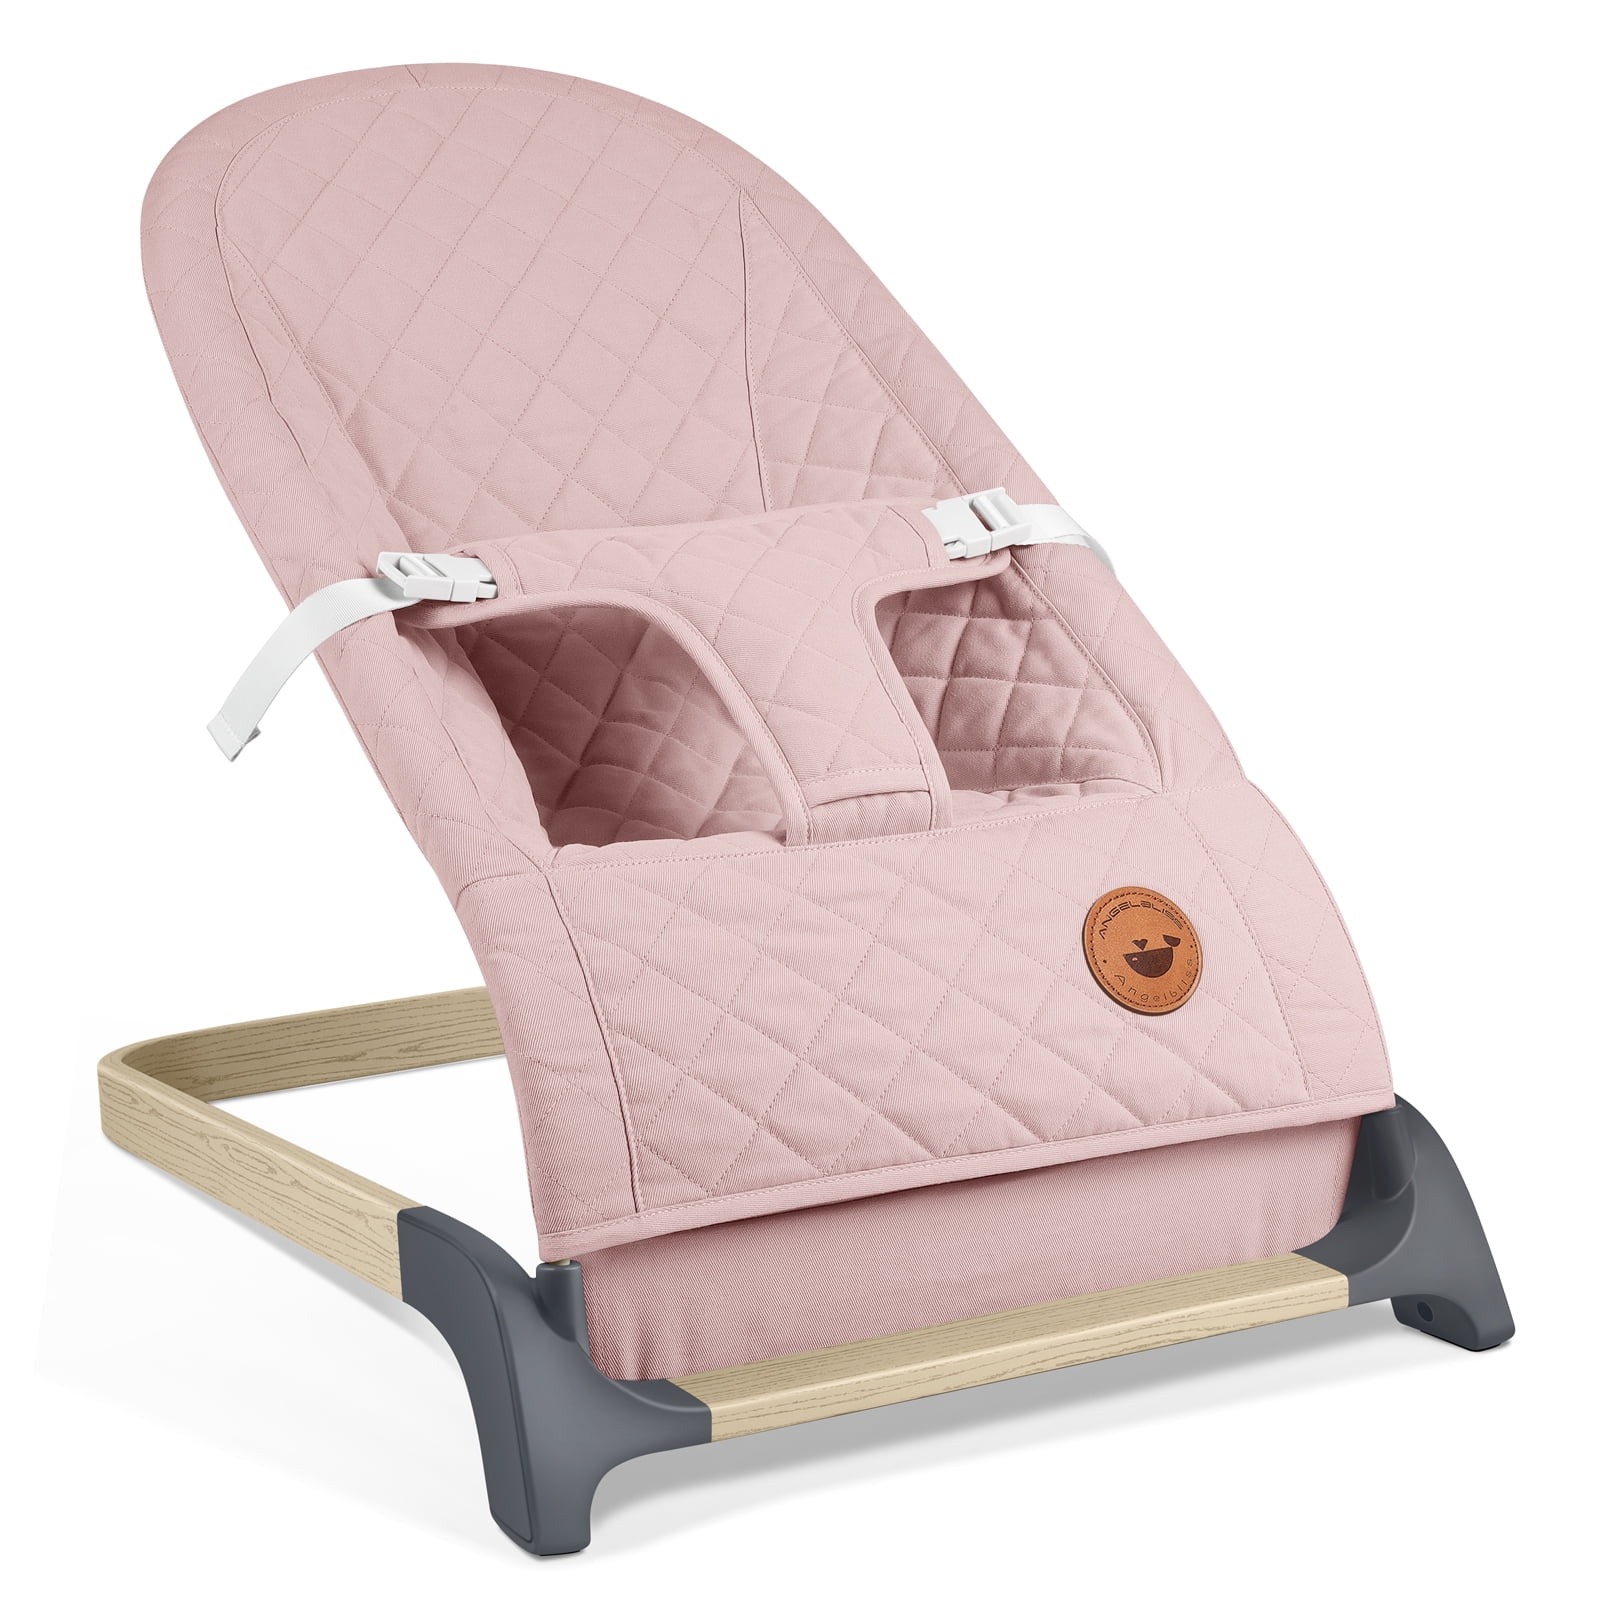 ANGELBLISS Baby Bouncer, Portable Bouncer Seat for Babies, Infants